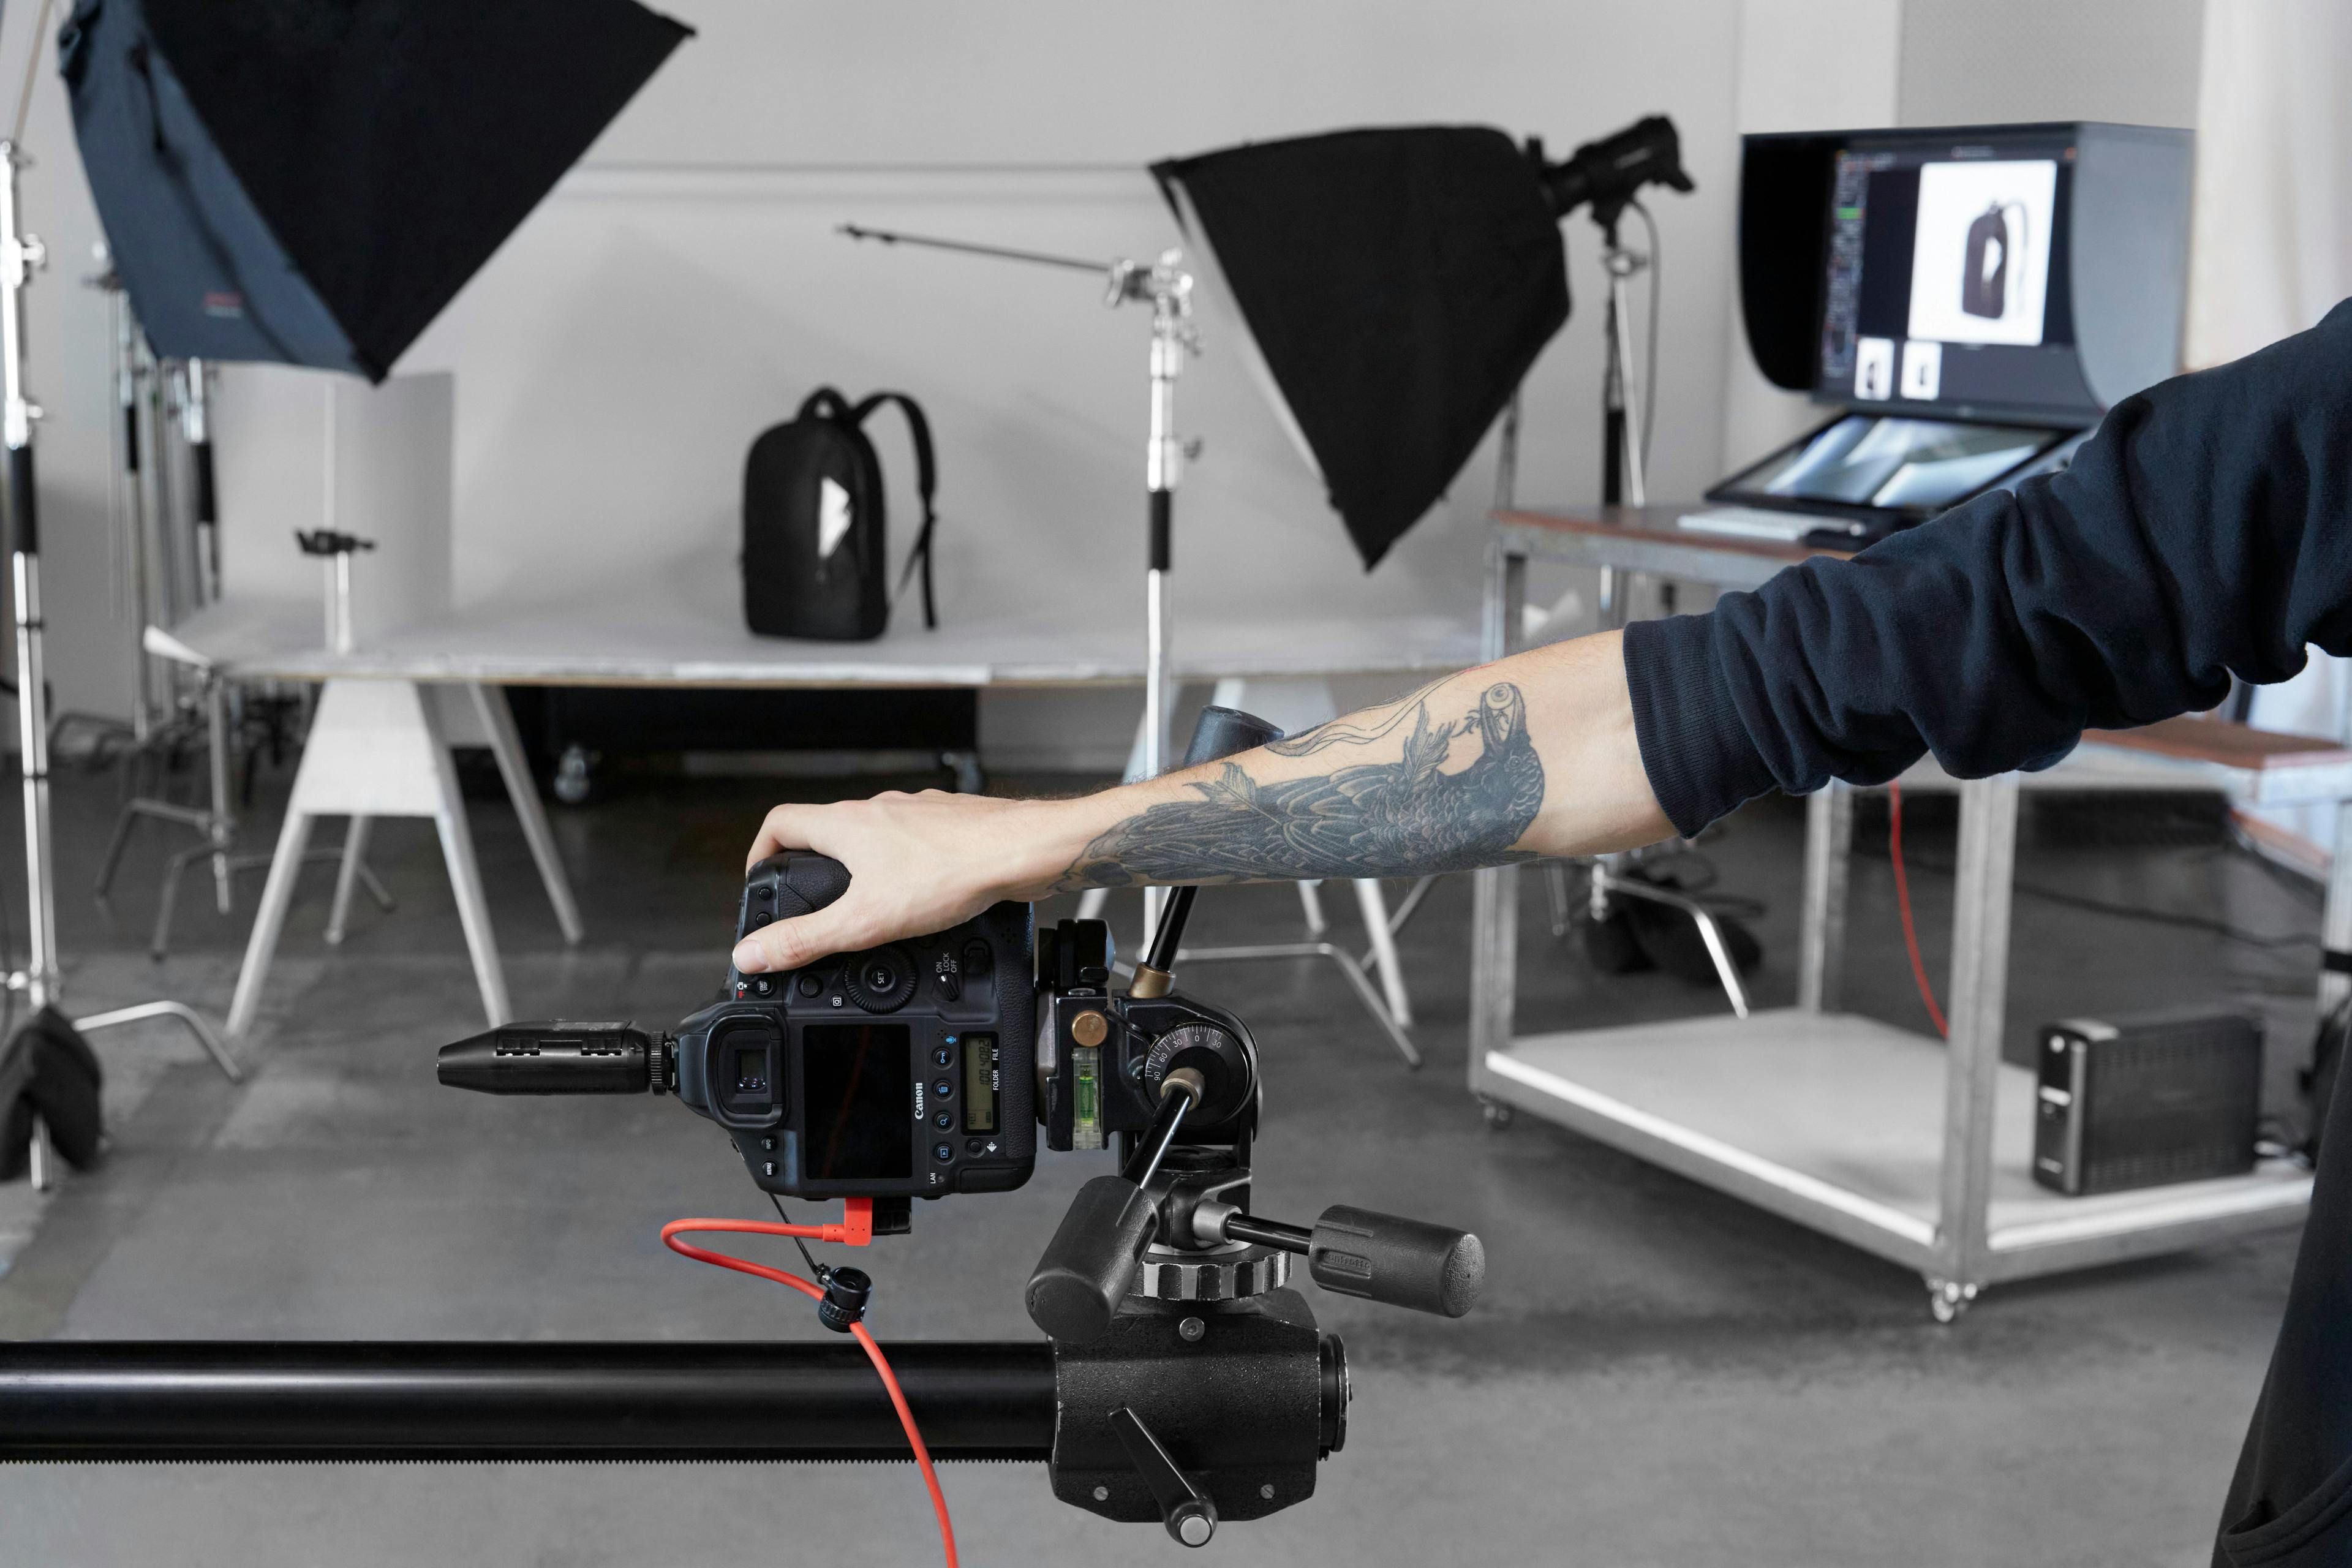 A photography studio with professional lighting and high tech cameras, ready to capture the perfect shot